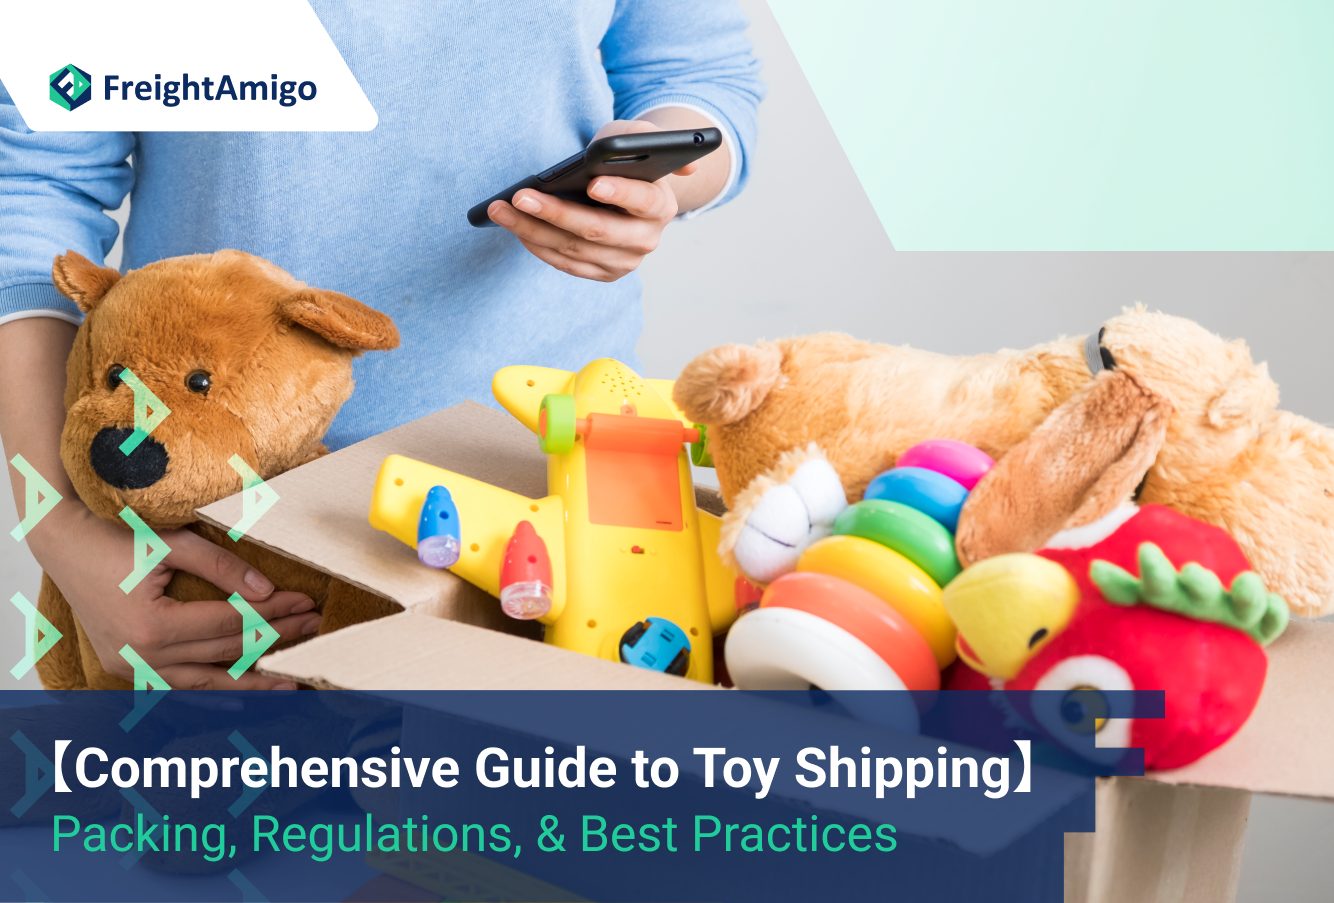 【Comprehensive Guide to Toy Shipping】 Packaging, Regulations, and Best Practices